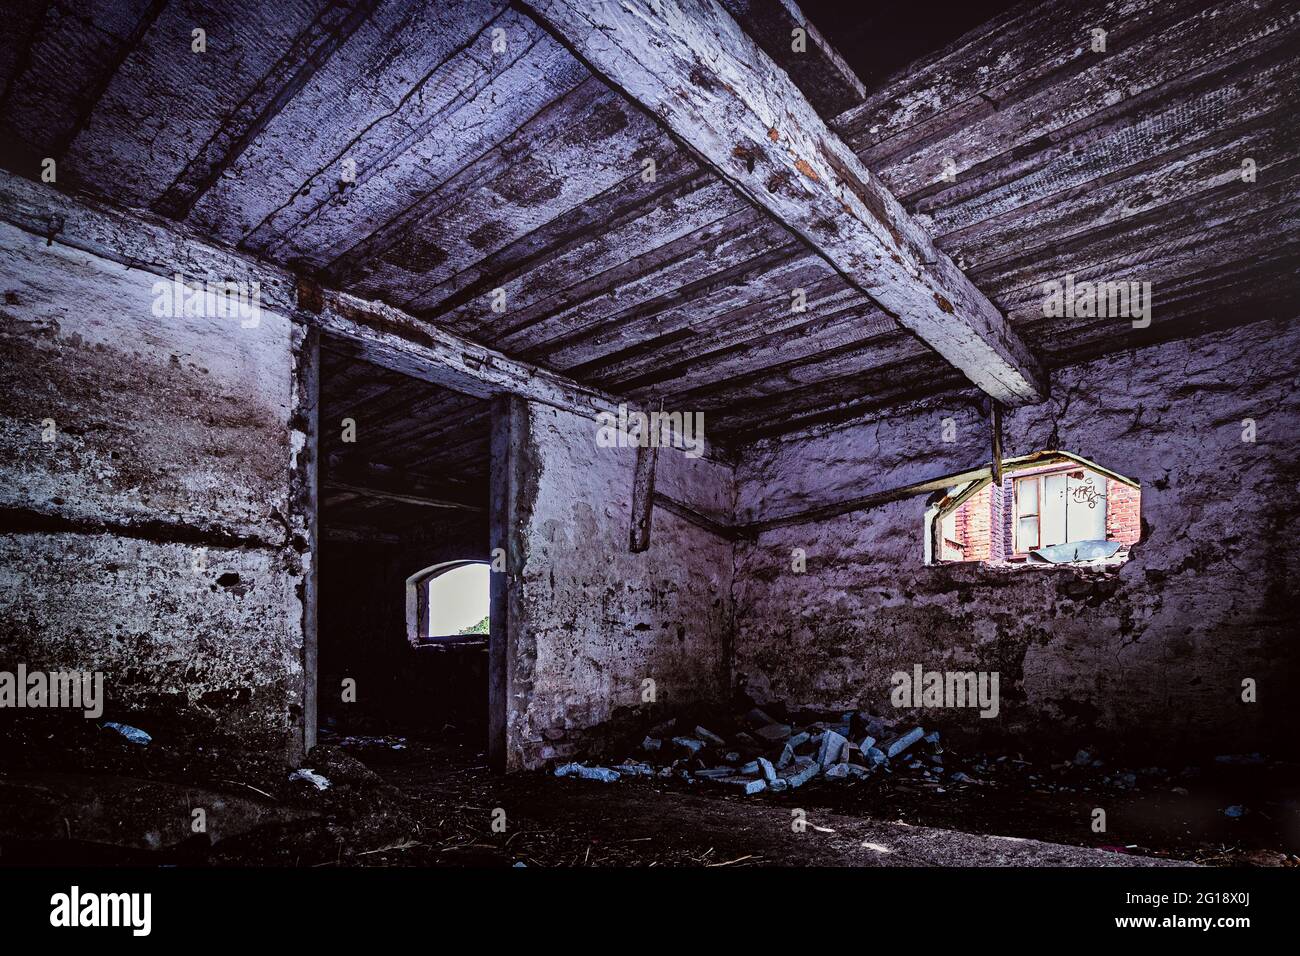 Nightmare horror basement in an old abandoned barn in 'The Blair Witch Project' style. Vacant, uninhabited architecture, abandoned place. Stock Photo